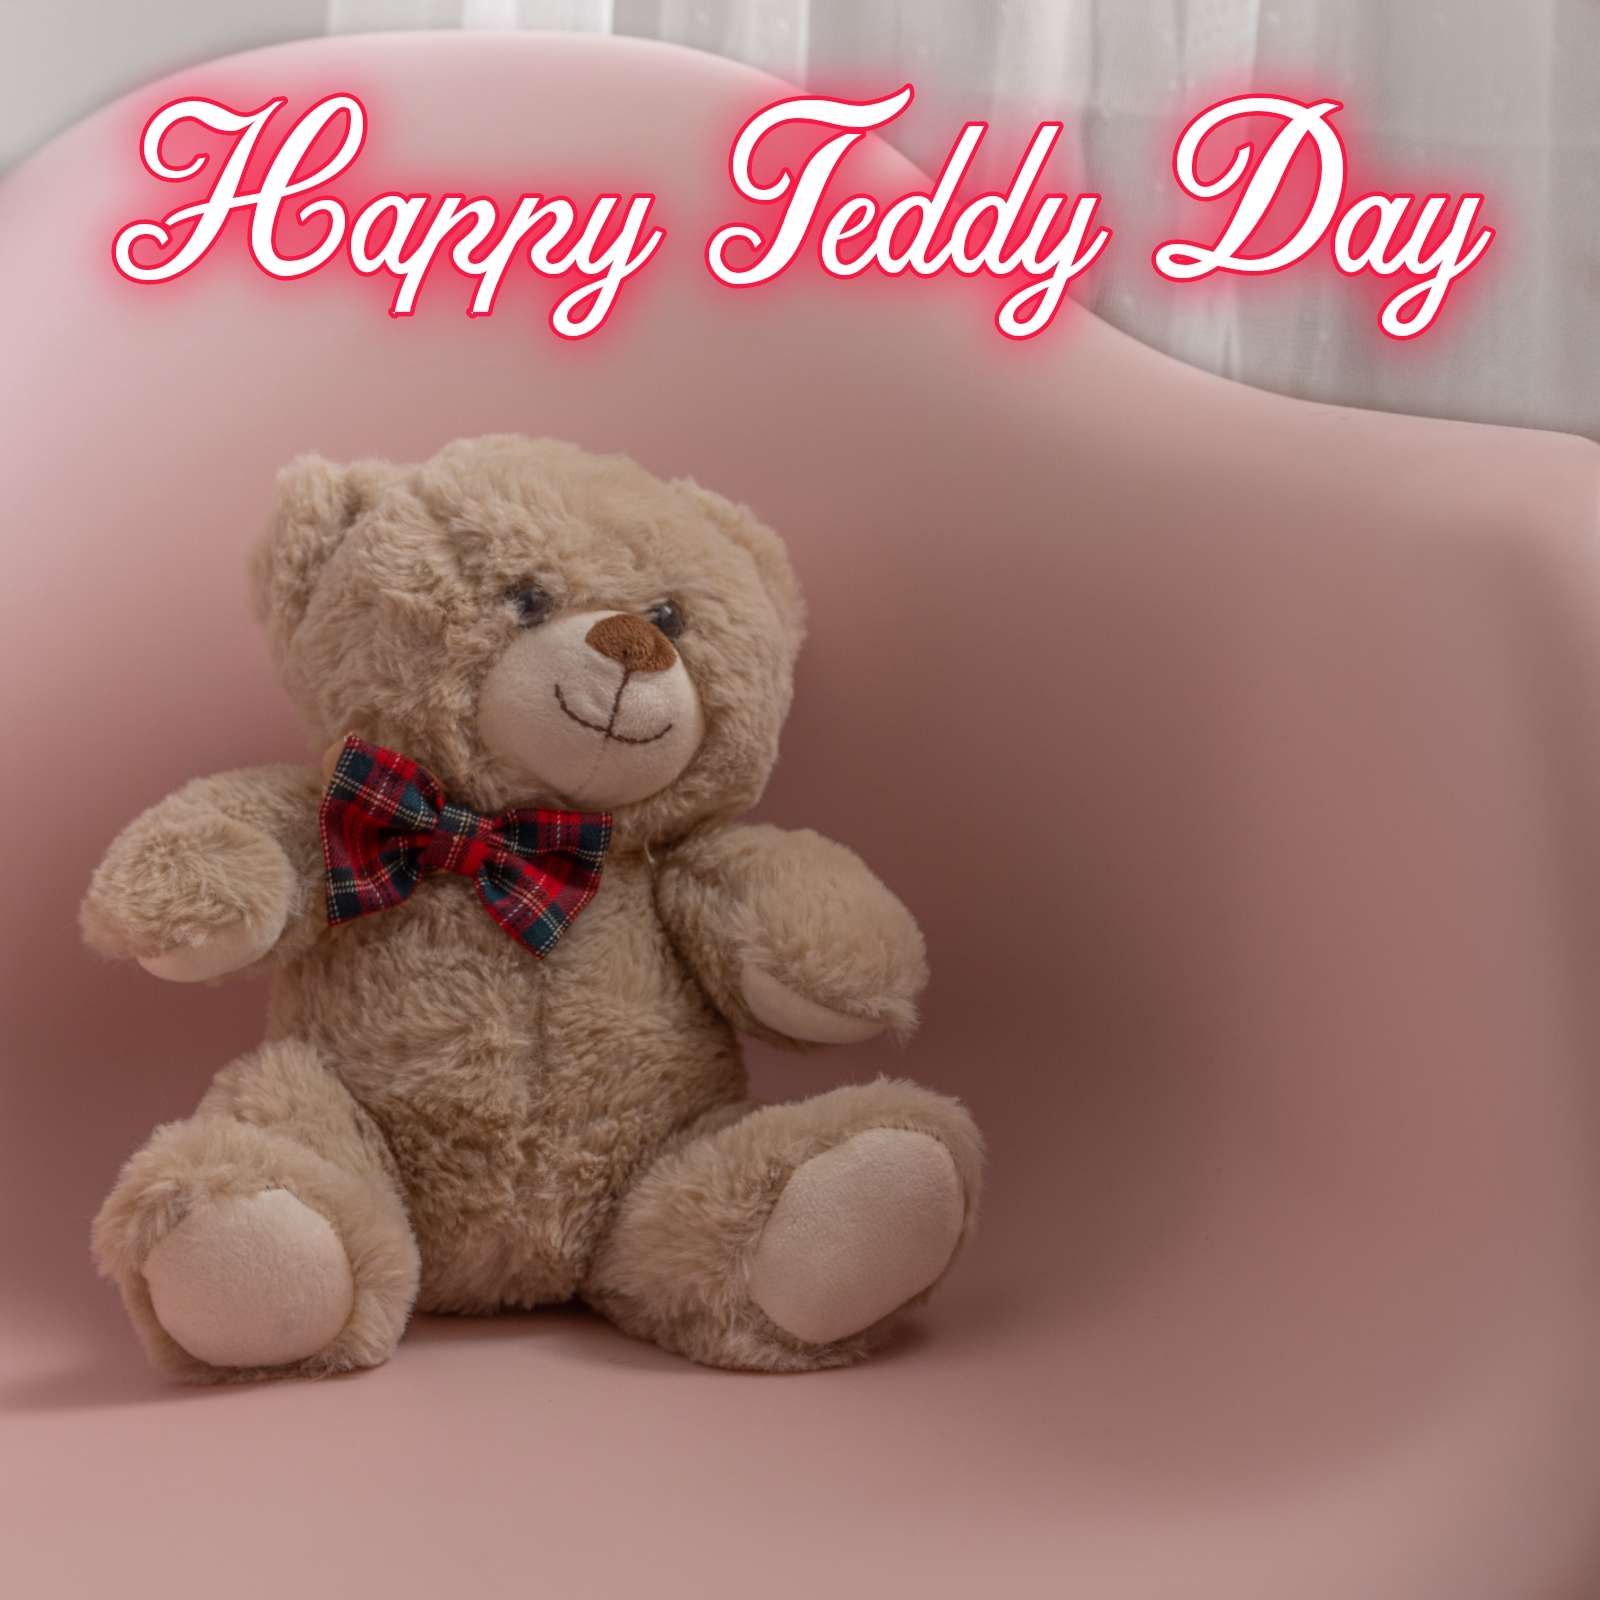 10 February 2022 Happy Teddy Day Images Download